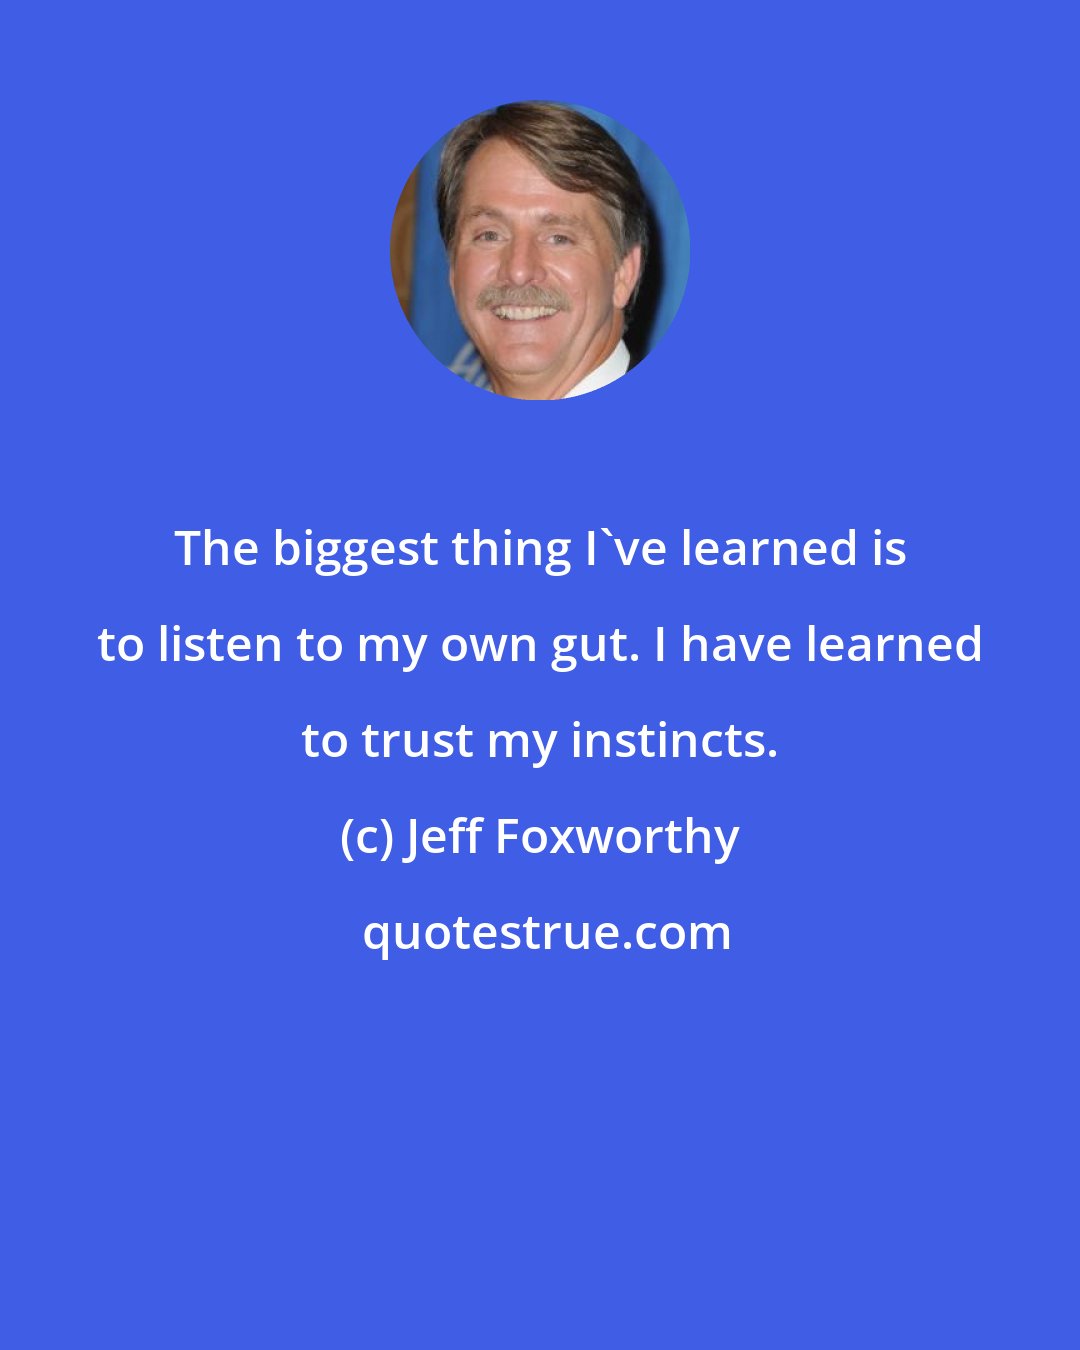 Jeff Foxworthy: The biggest thing I've learned is to listen to my own gut. I have learned to trust my instincts.